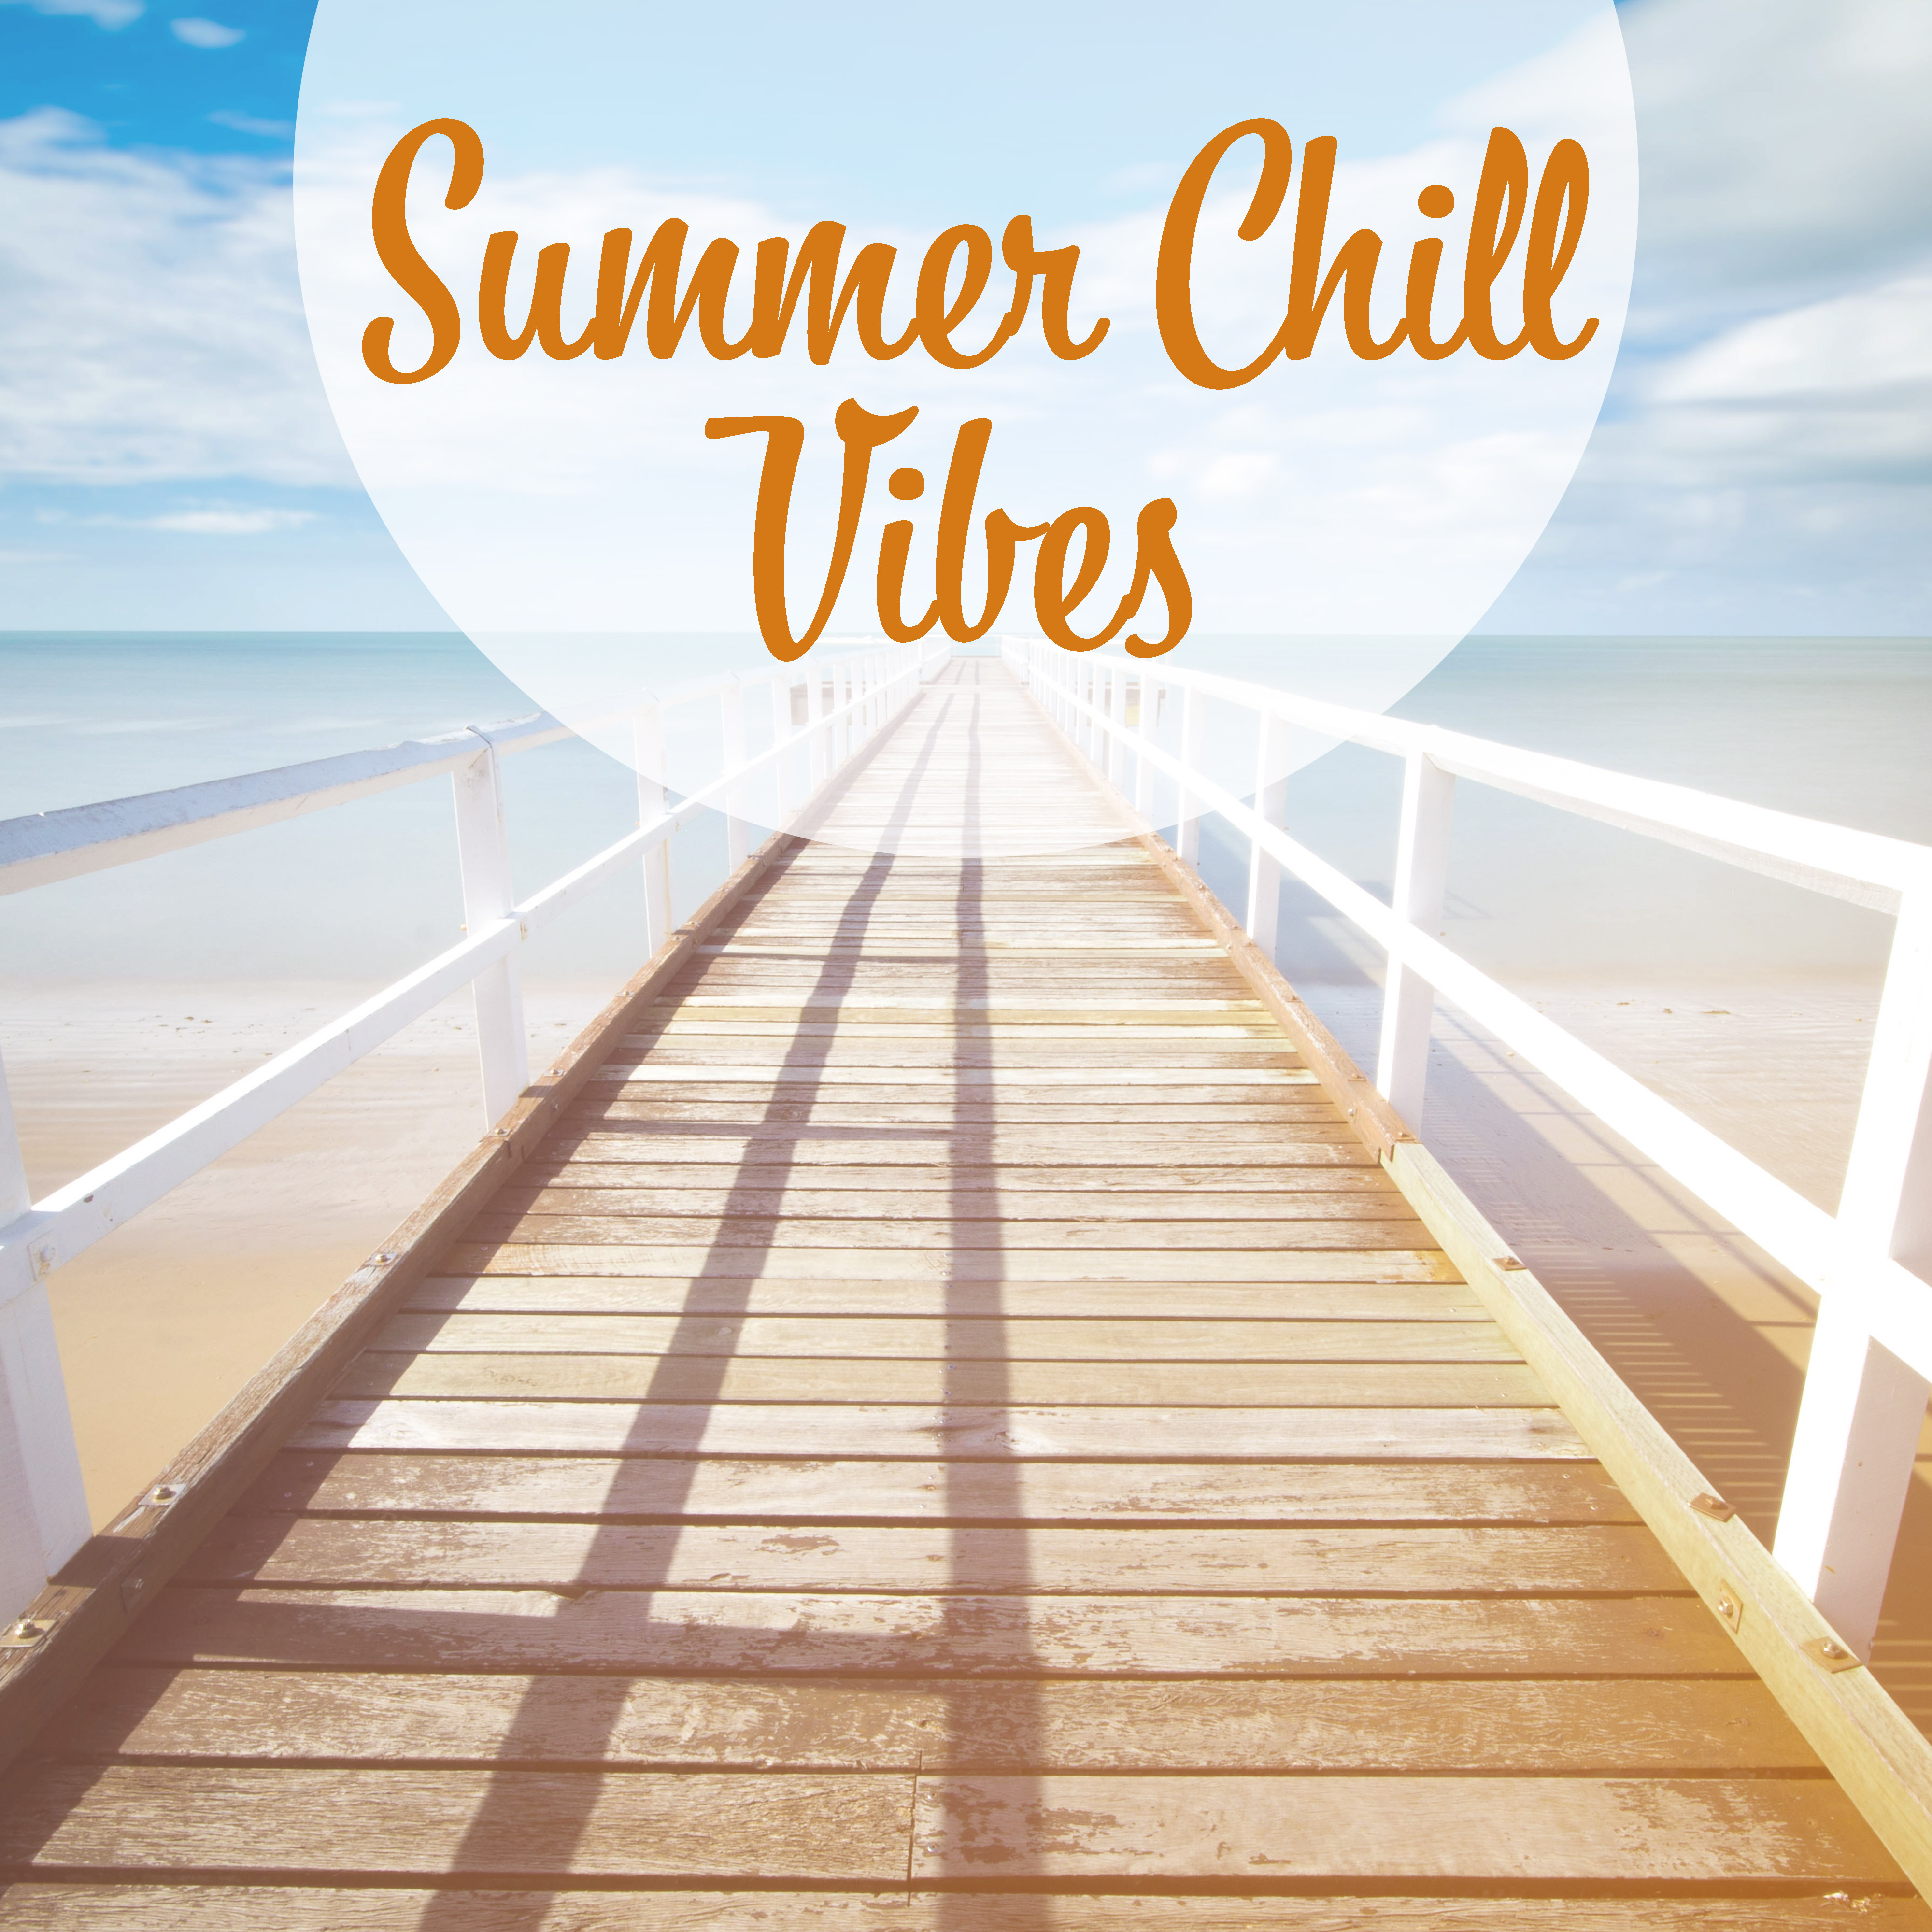 Summer Chill Vibes – Easy Listening, Time to Relax, Peaceful Ibiza